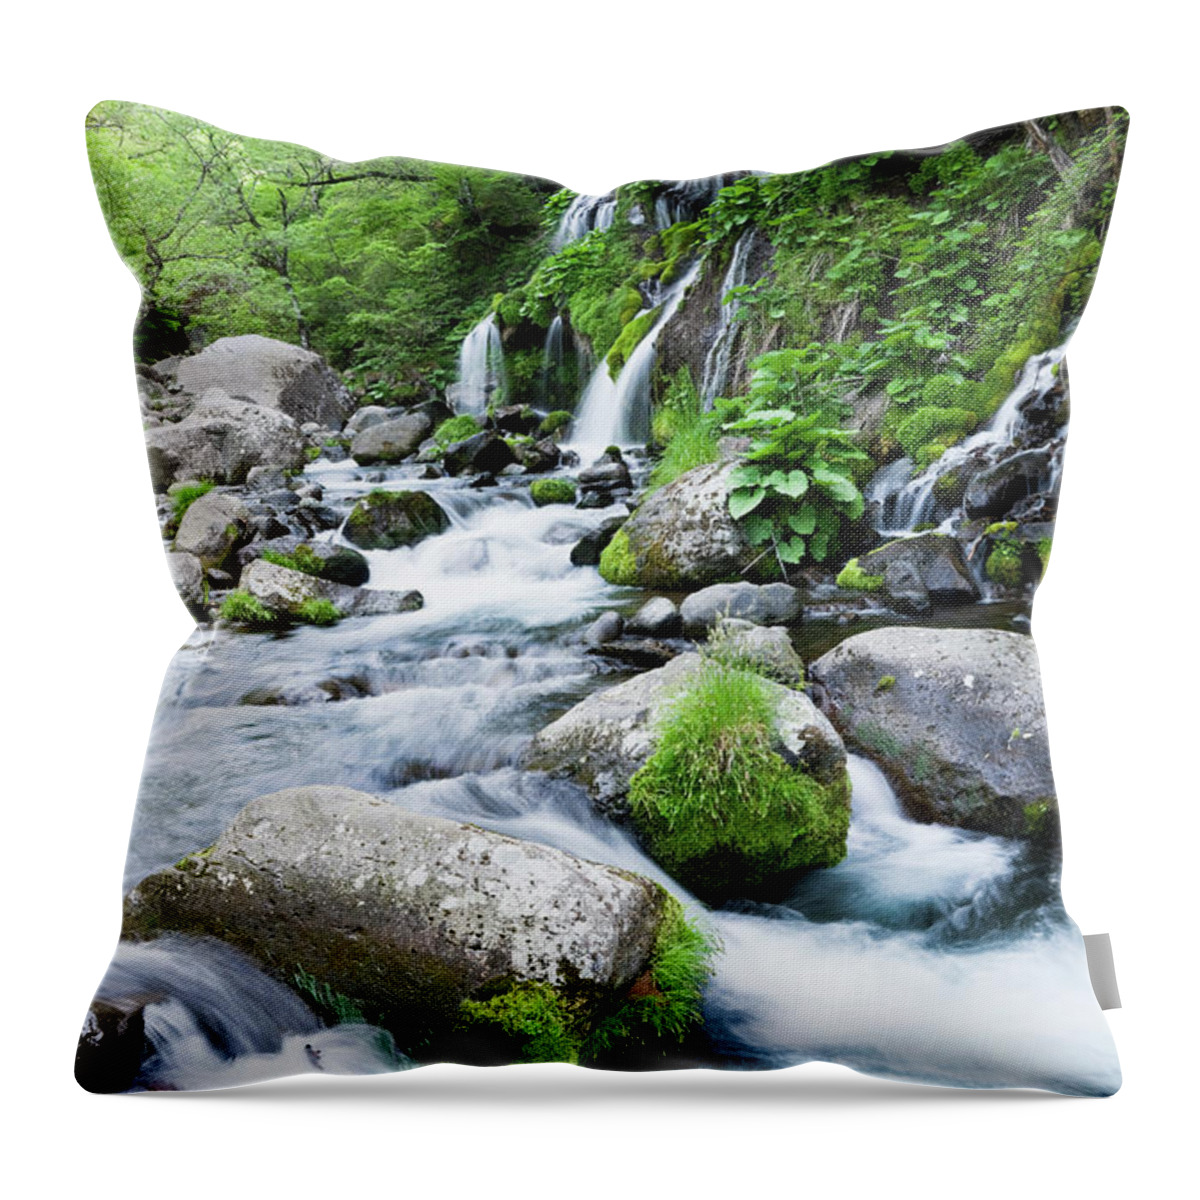 Scenics Throw Pillow featuring the photograph Cascade #2 by Ooyoo